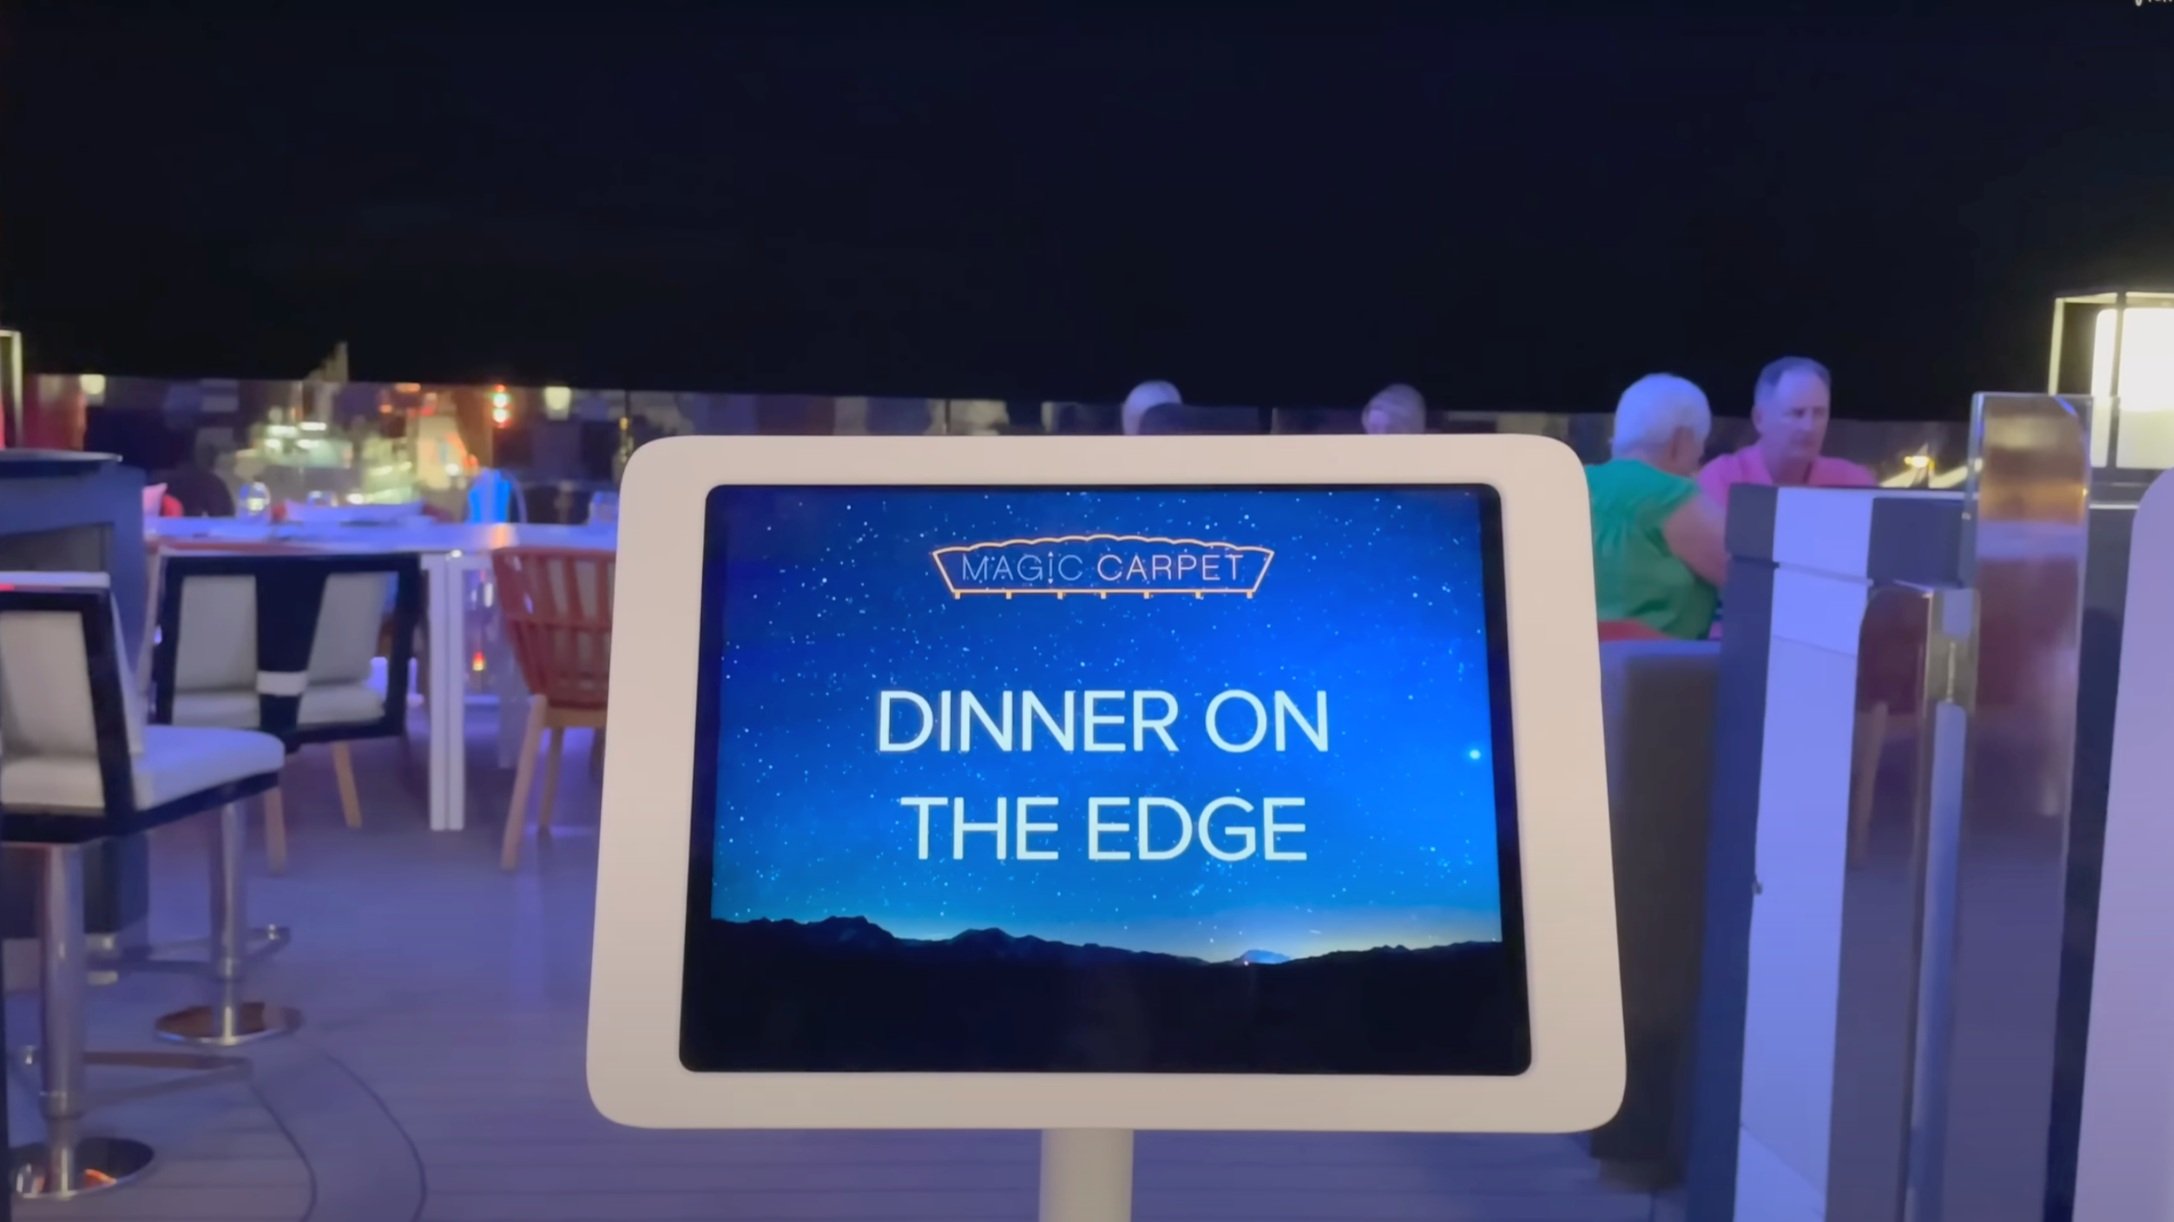  Dinner on The Edge - surely one of the most unusual restaurants in the world.  